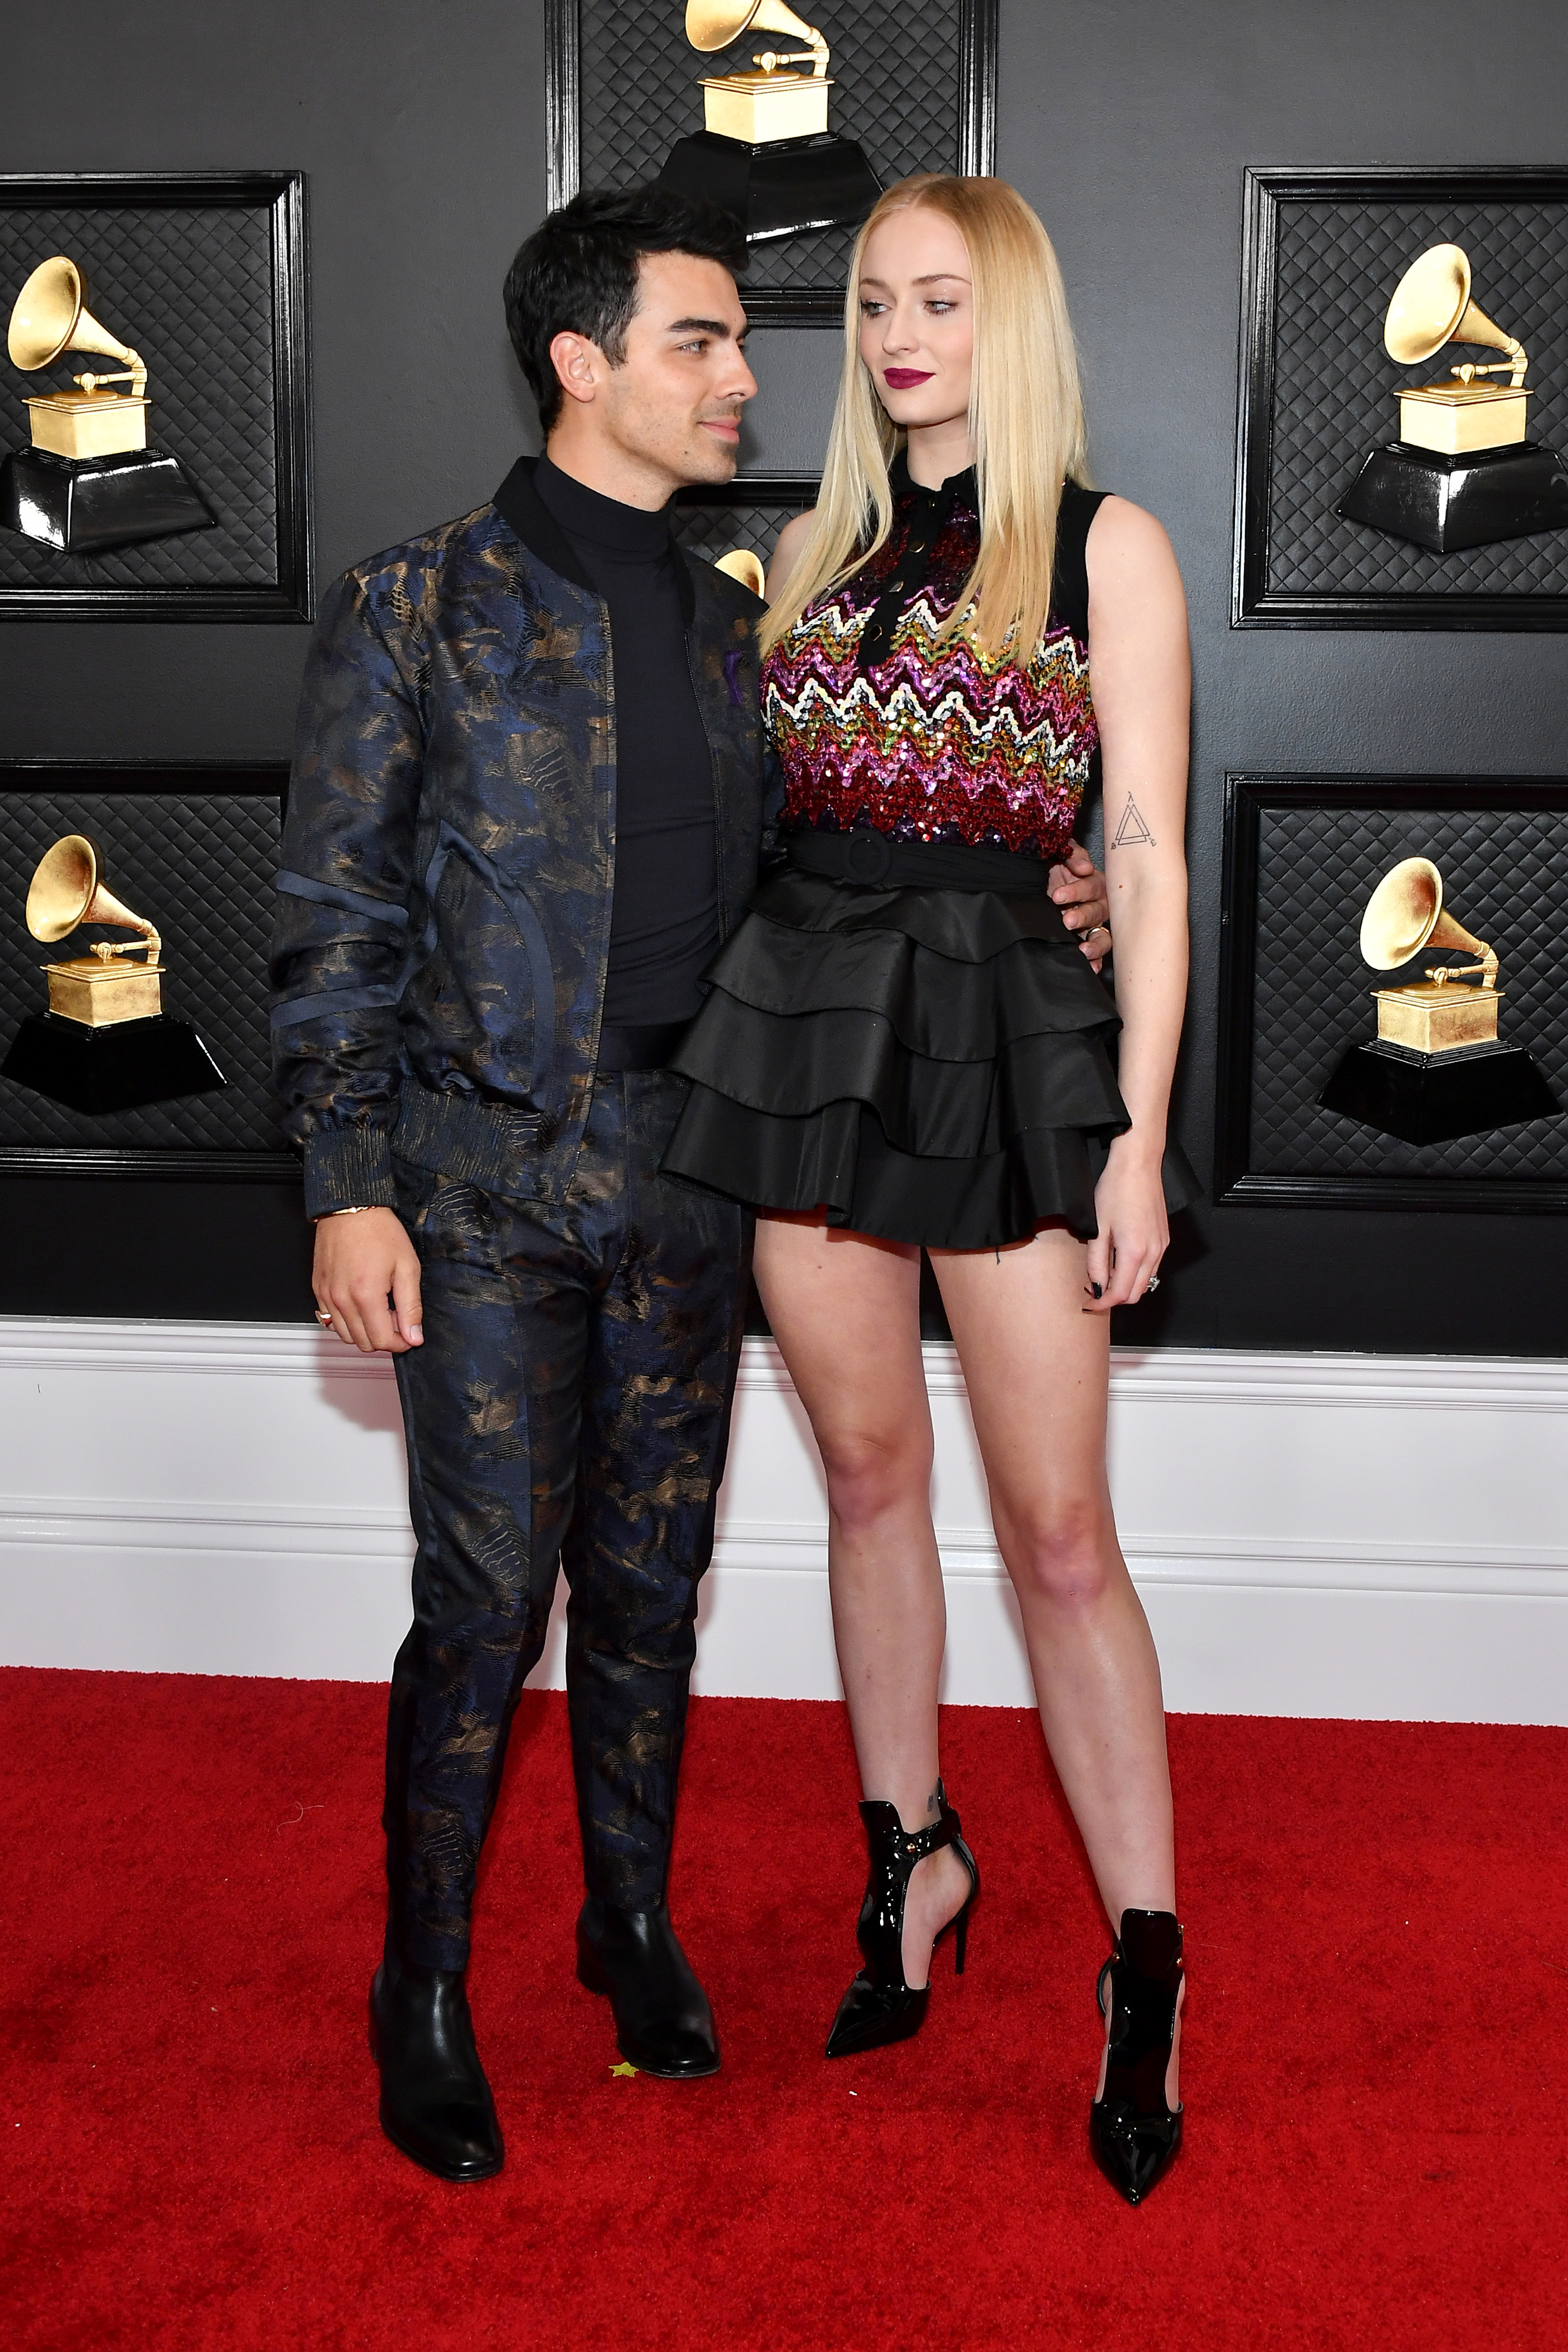 Joe Jonas and Sophie Turner attend the 62nd Annual Grammy Awards at Staples Center in Los Angeles, California on January 26, 2020 | Source: Getty Images